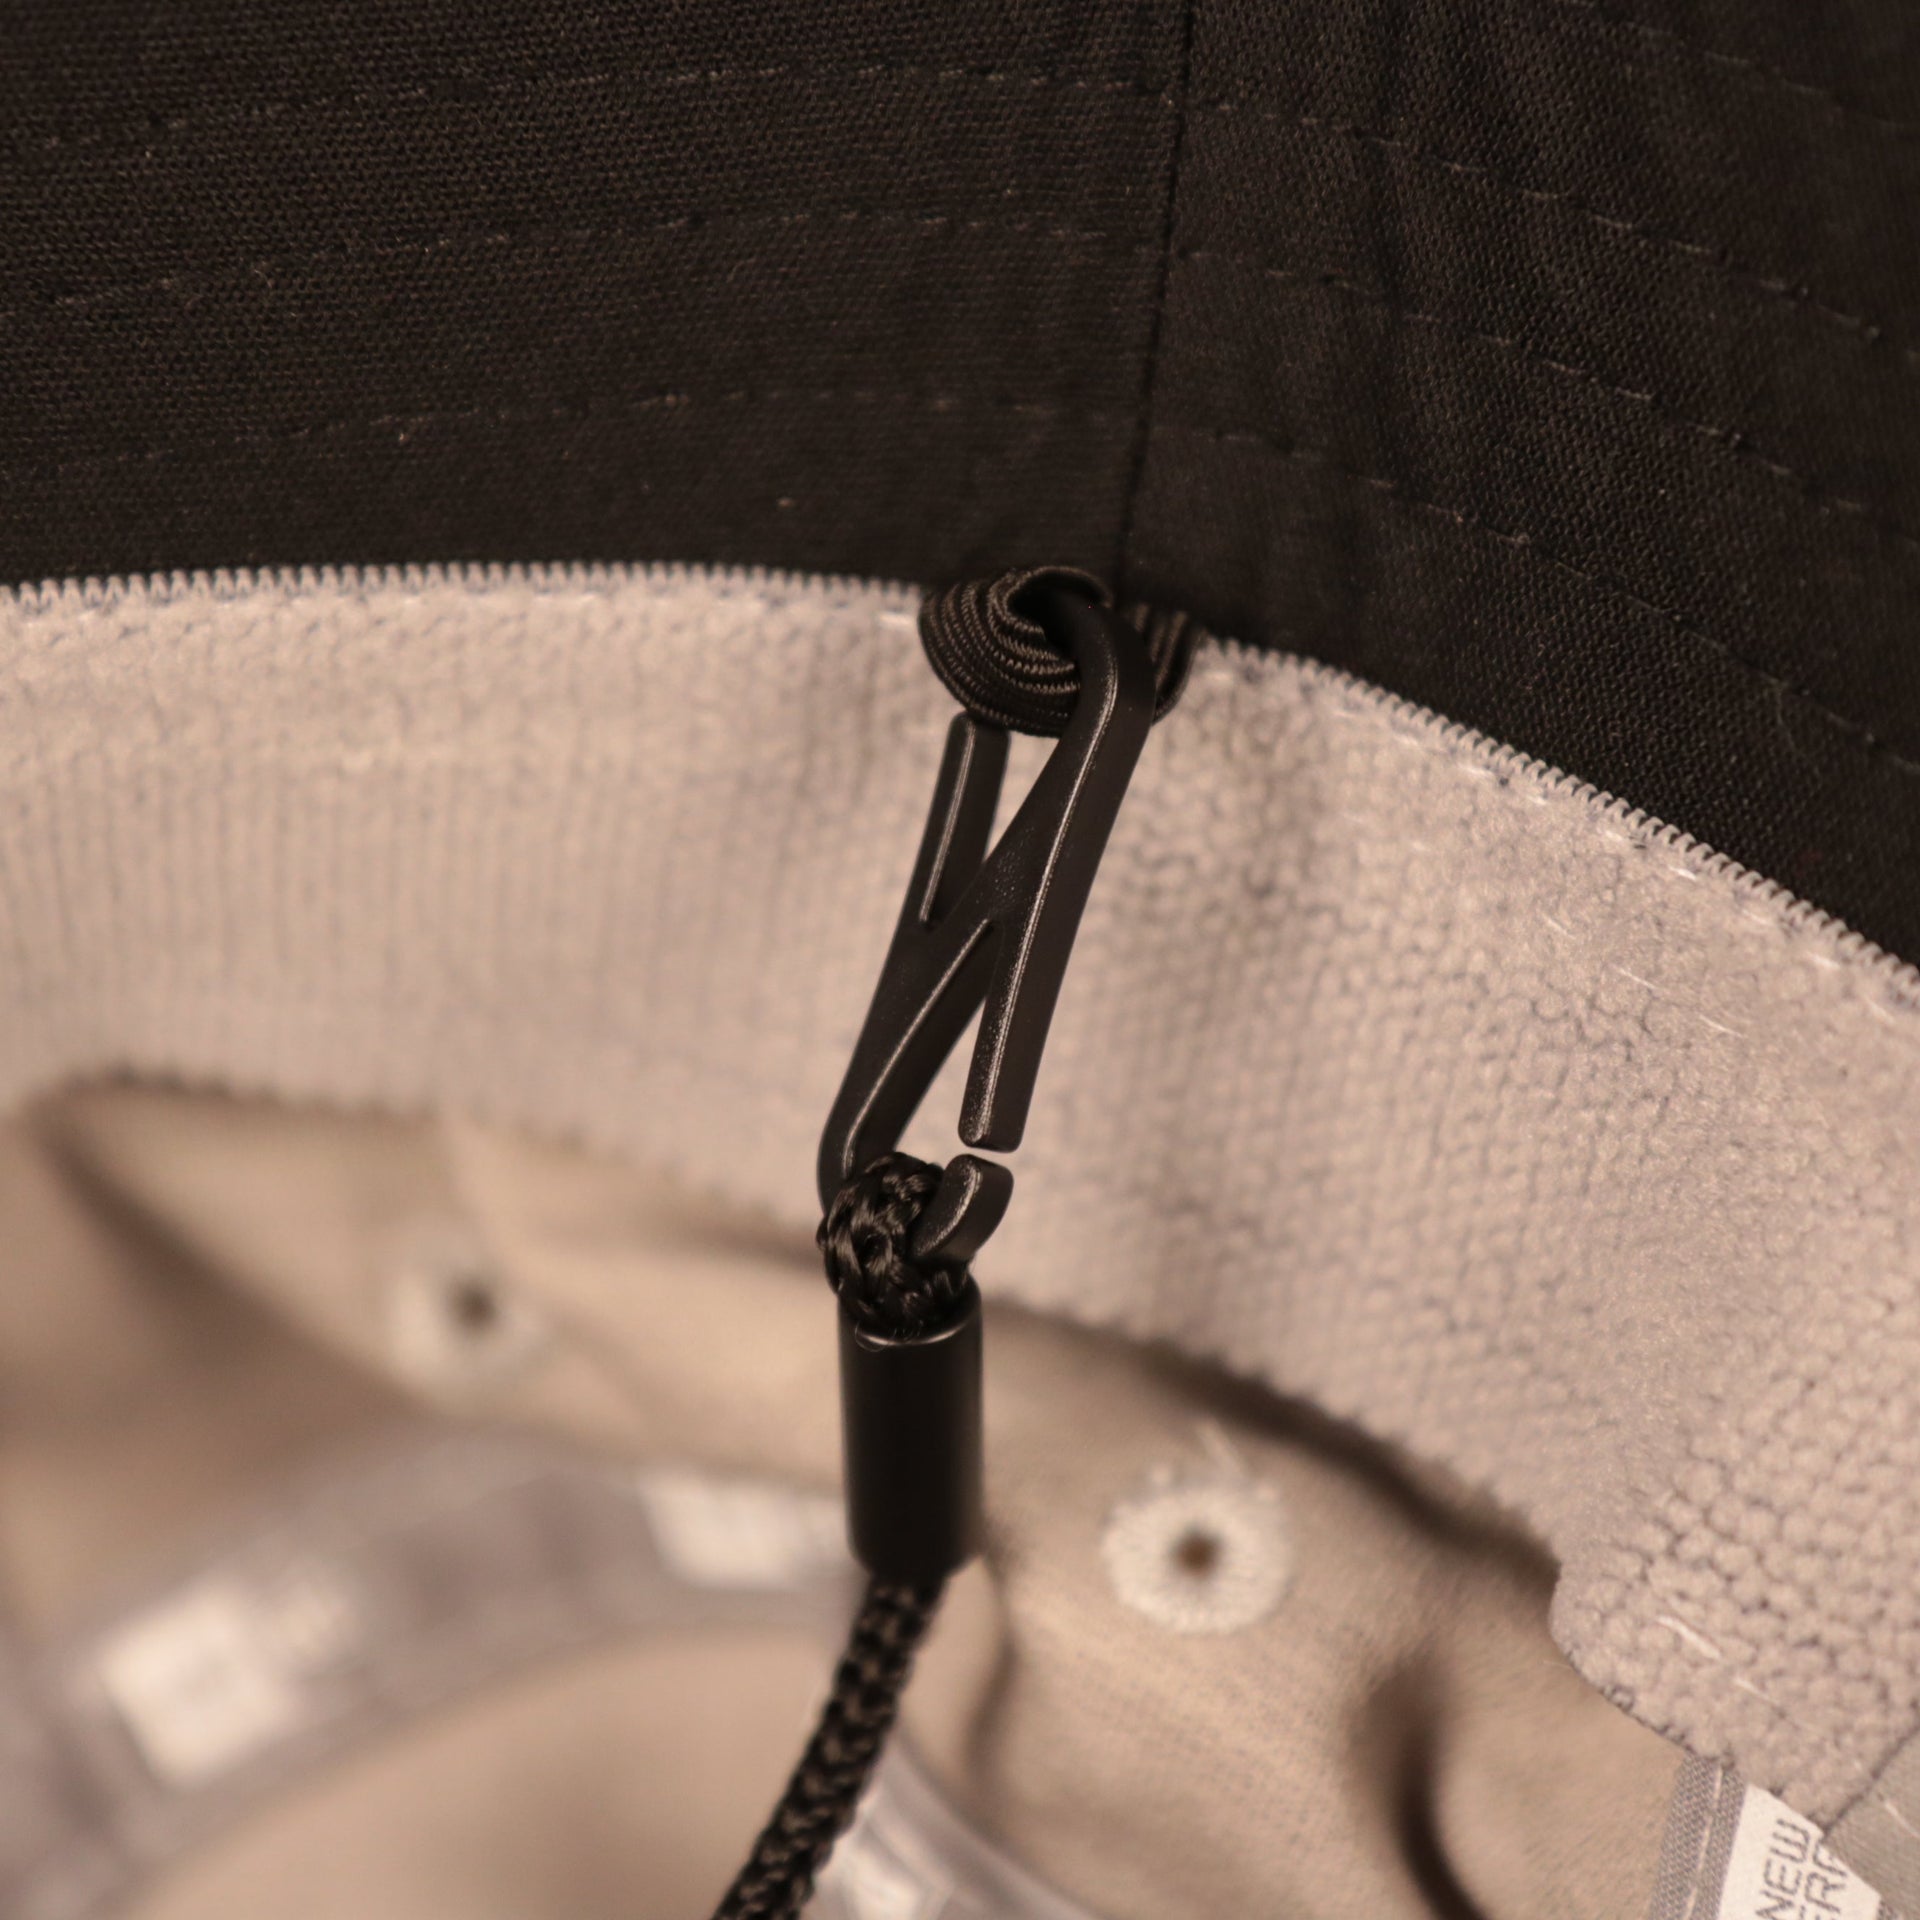 A closeup shot of the adjustable strings of the gray nfl on field training bucket hat by New Era.